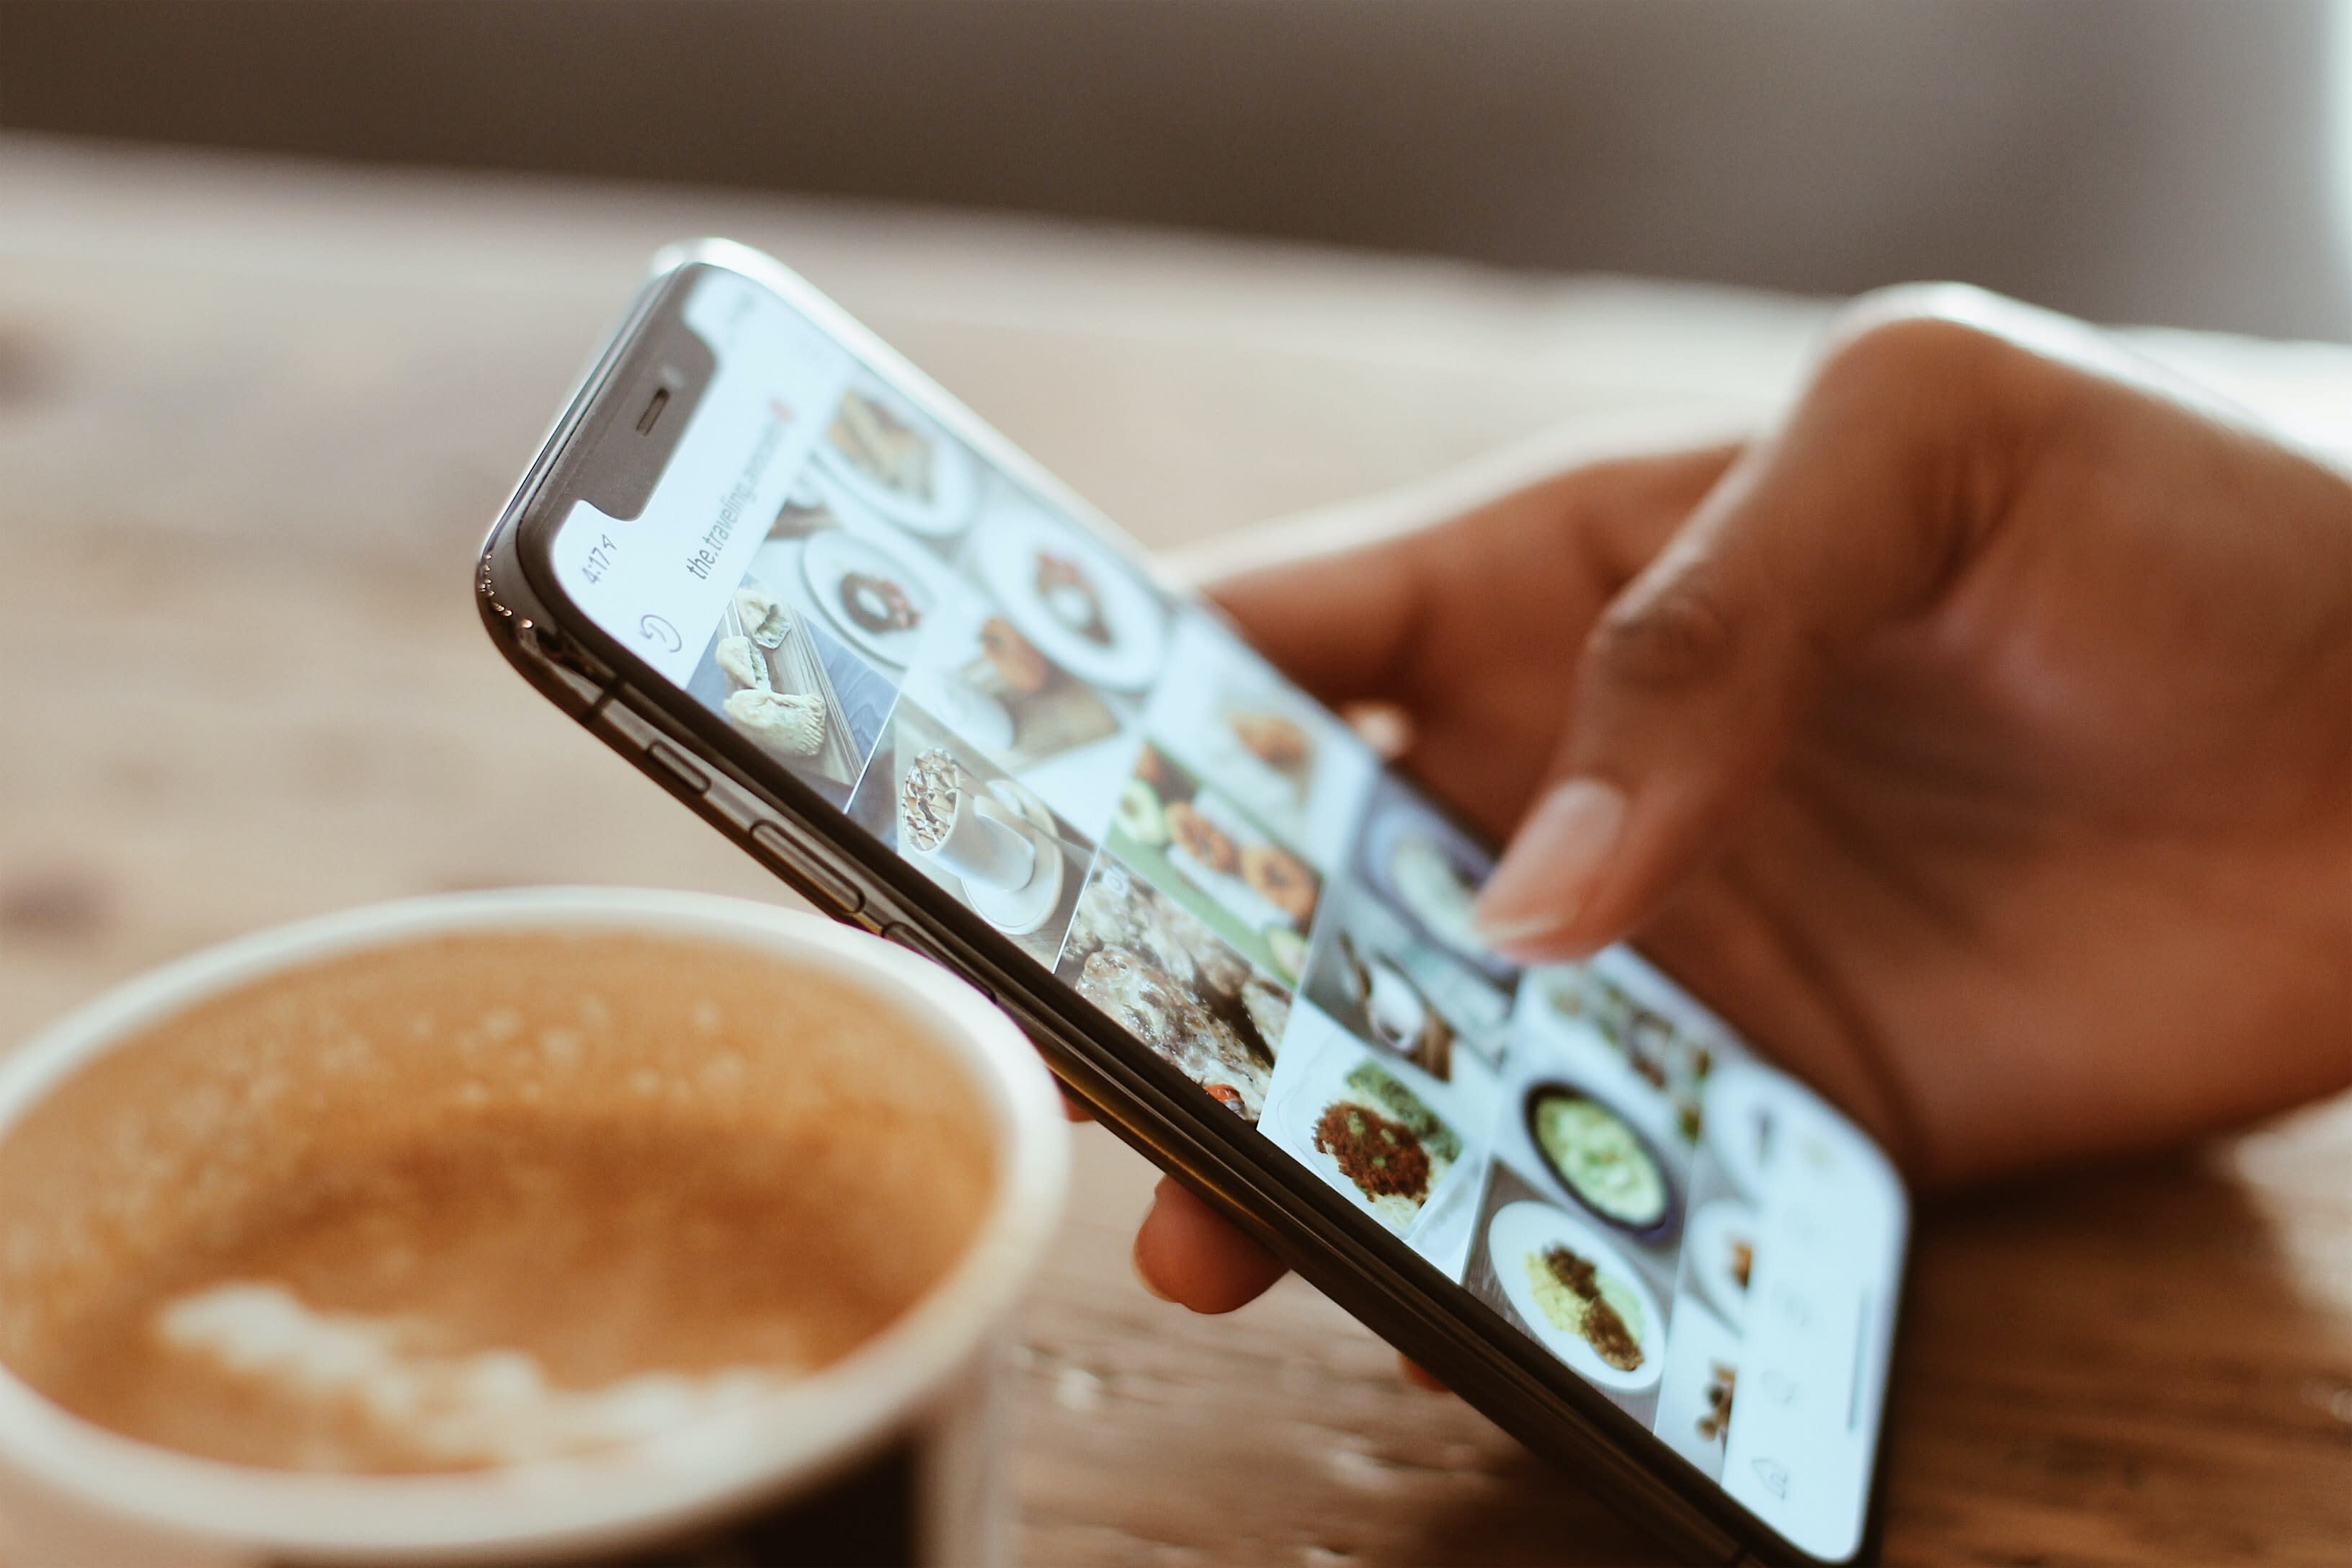  A close up of a person using social media on their phone. There is a cup of coffee in the background. 